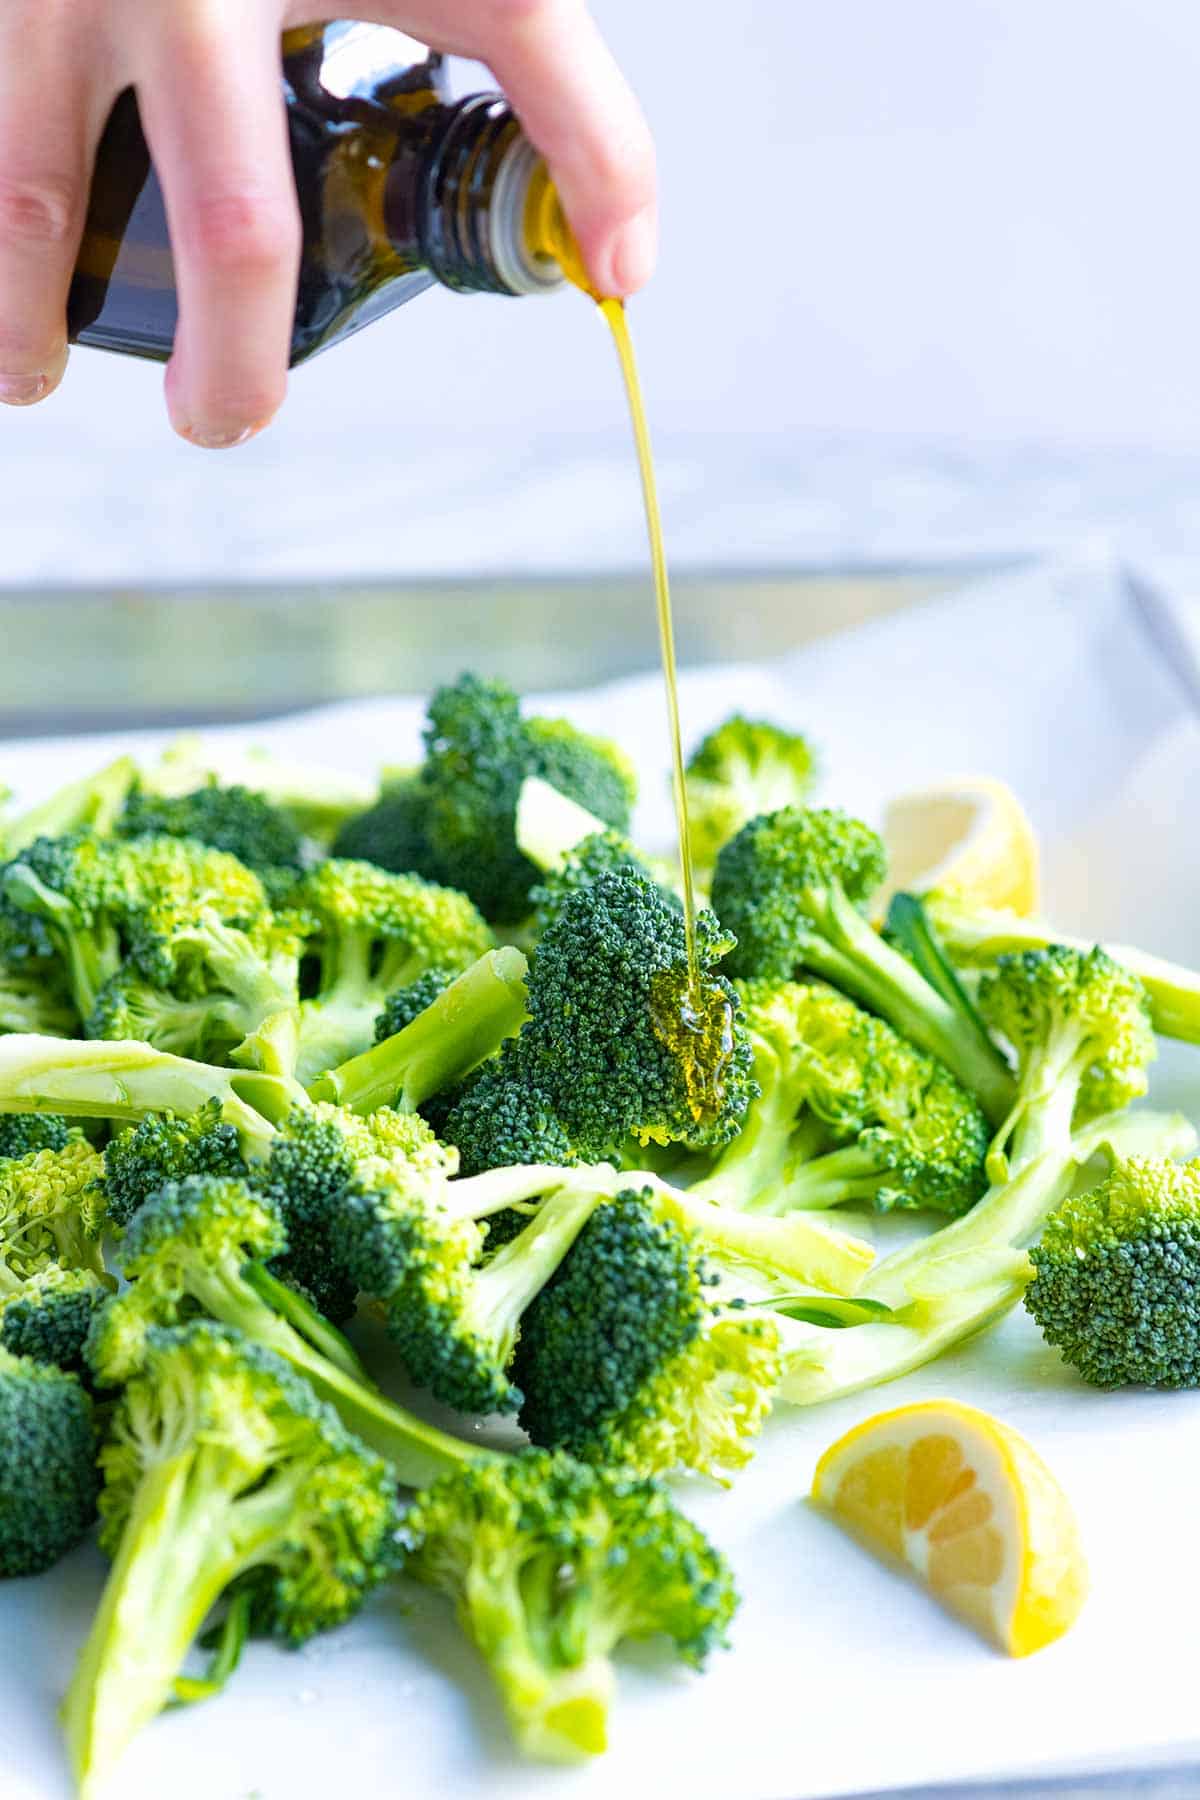 Adding olive oil to raw broccoli before roasting